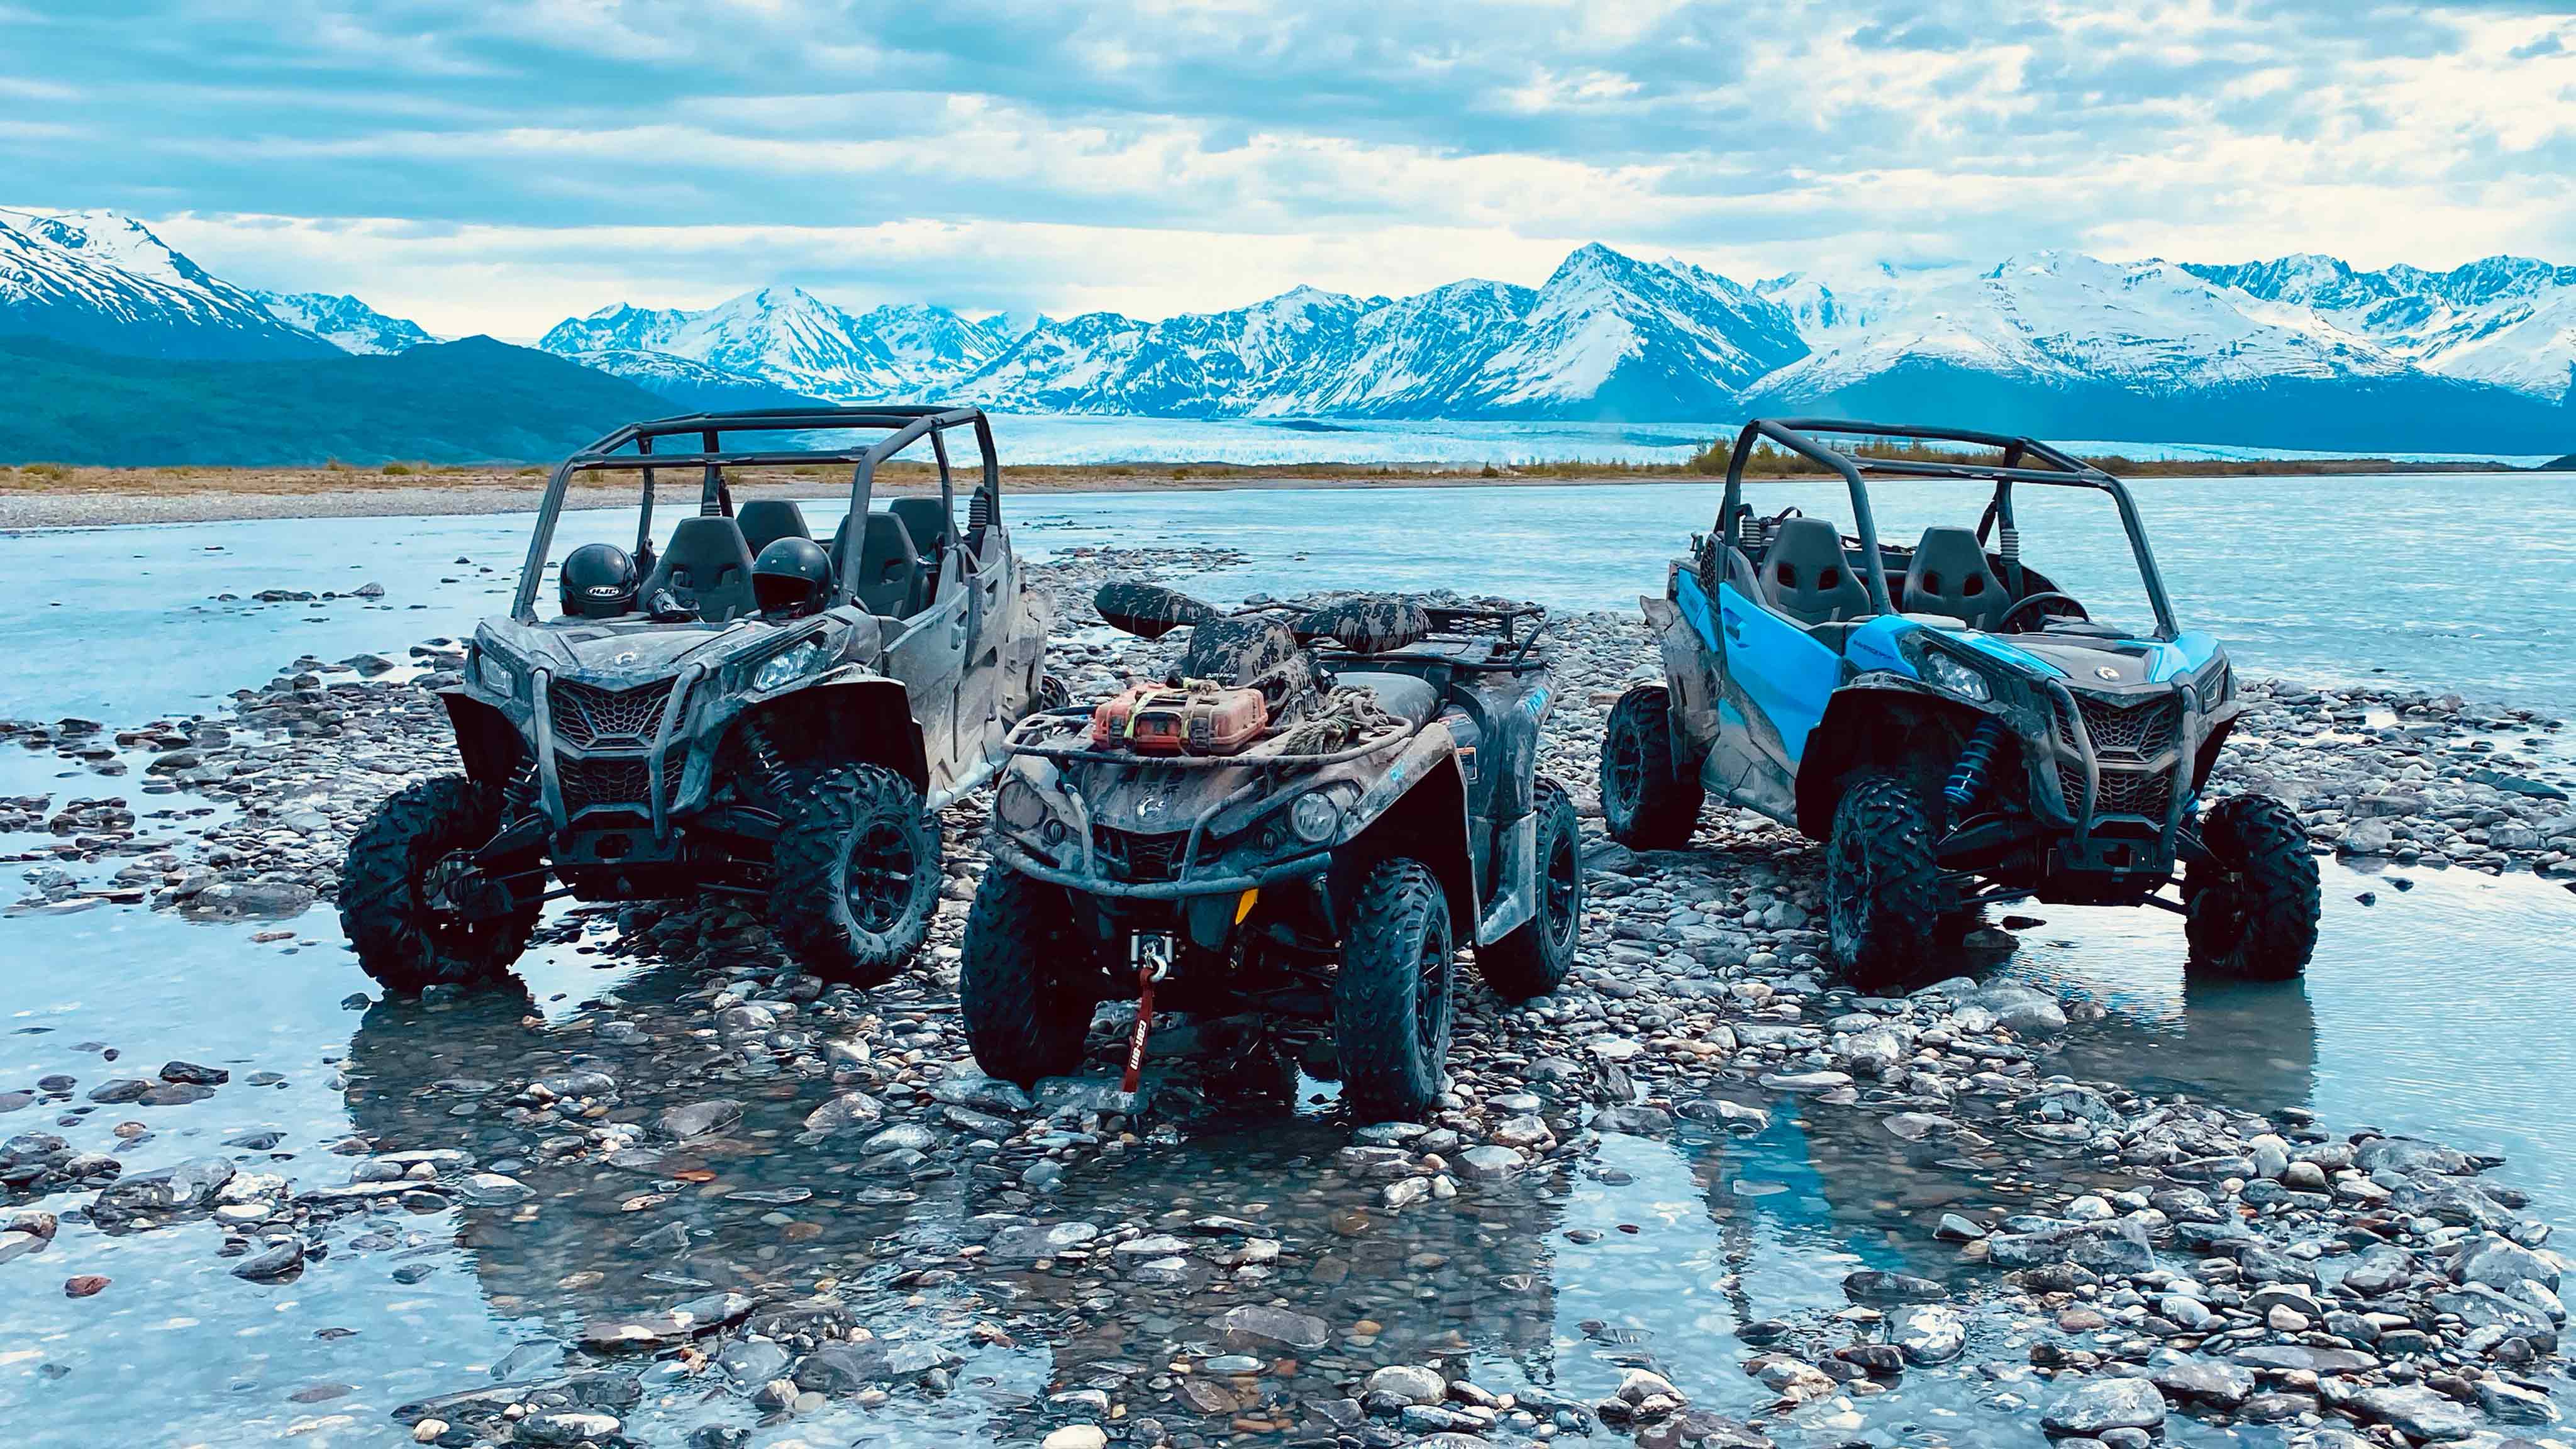 Two SxSs and ATV parked on rocky shore